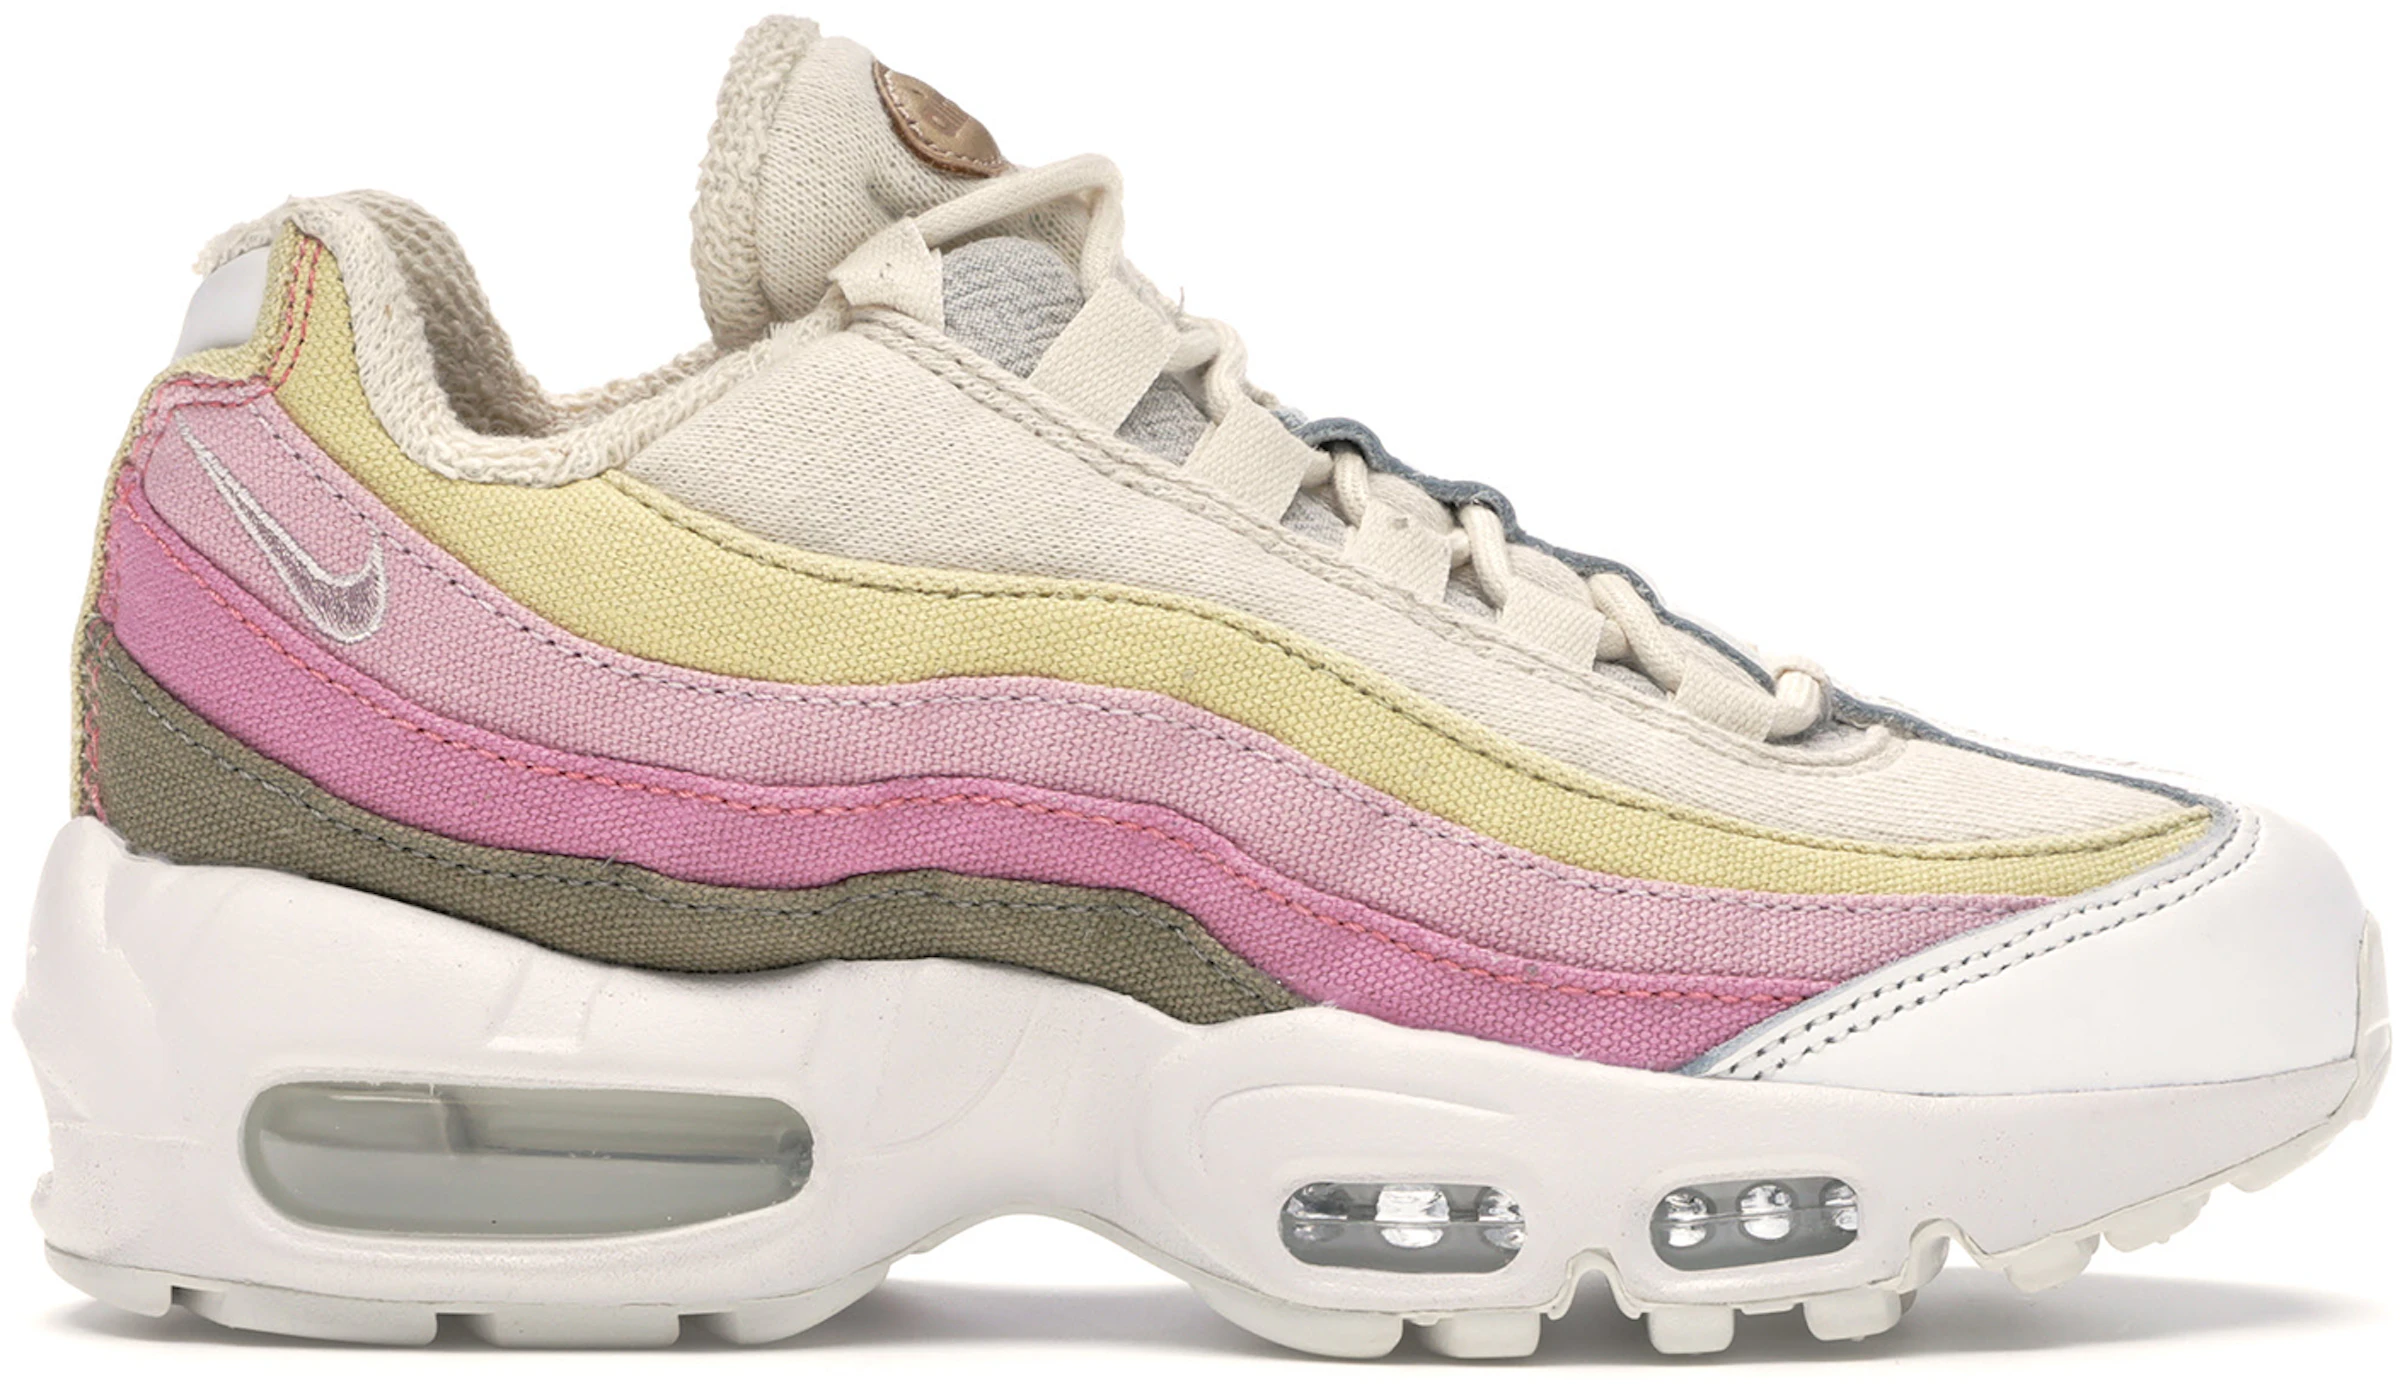 Nike Air Max 95 Color Collection (Women's) - CD7142-700 - US